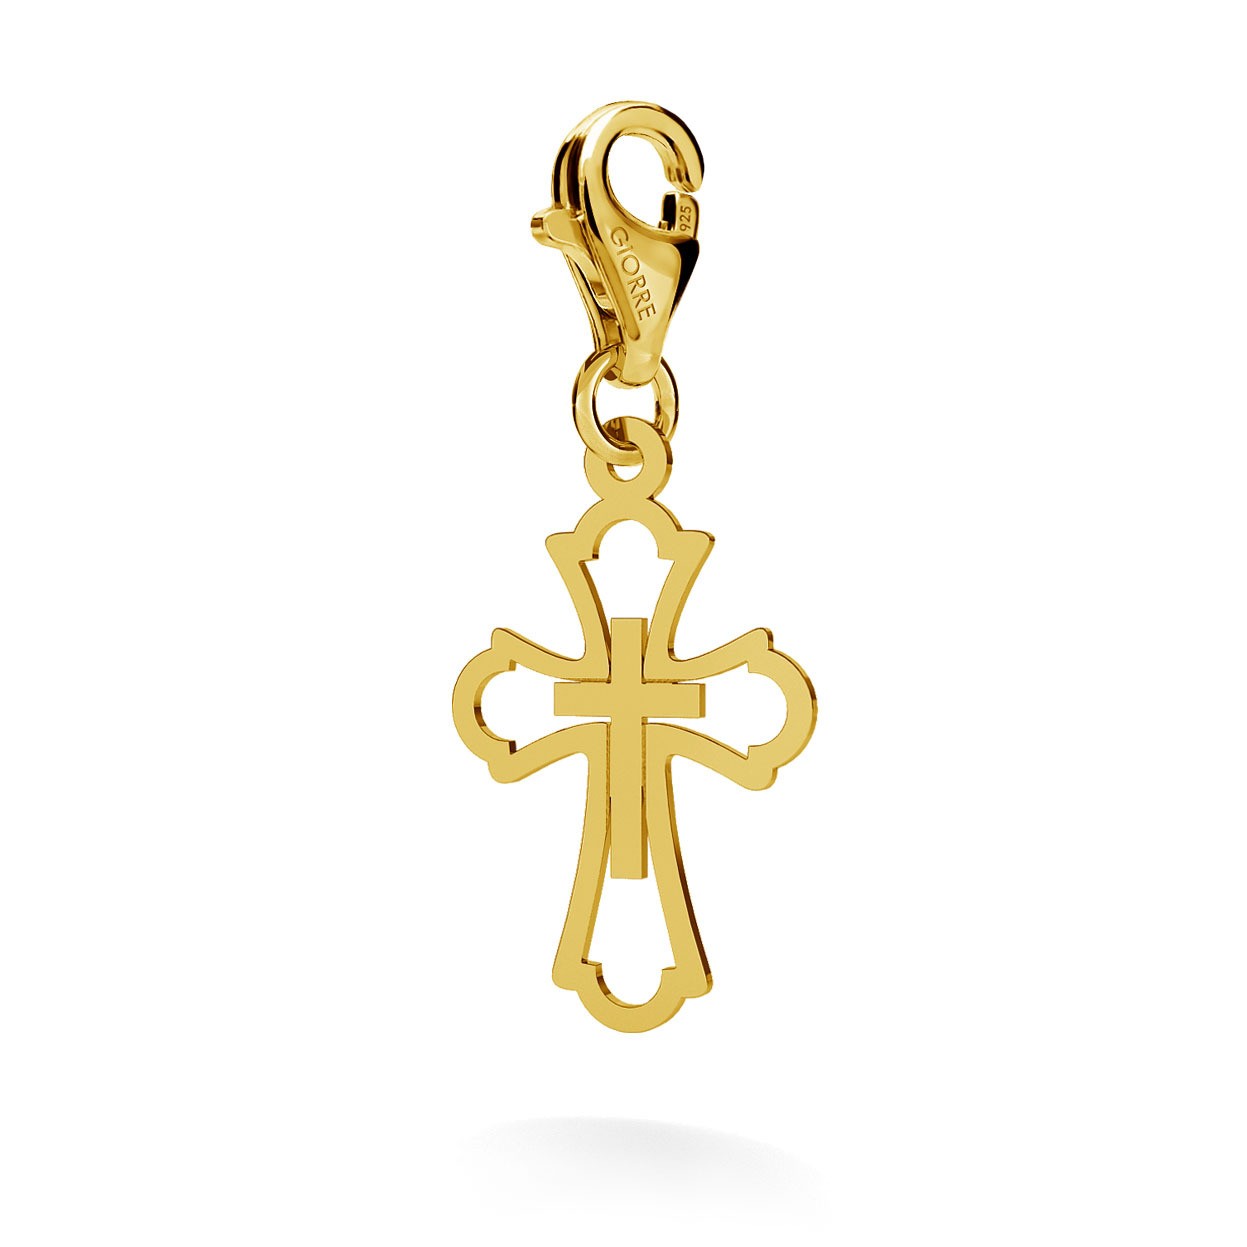 CHARM 59, OPENWORK CROSS, SILVER 925,  RHODIUM OR GOLD PLATED